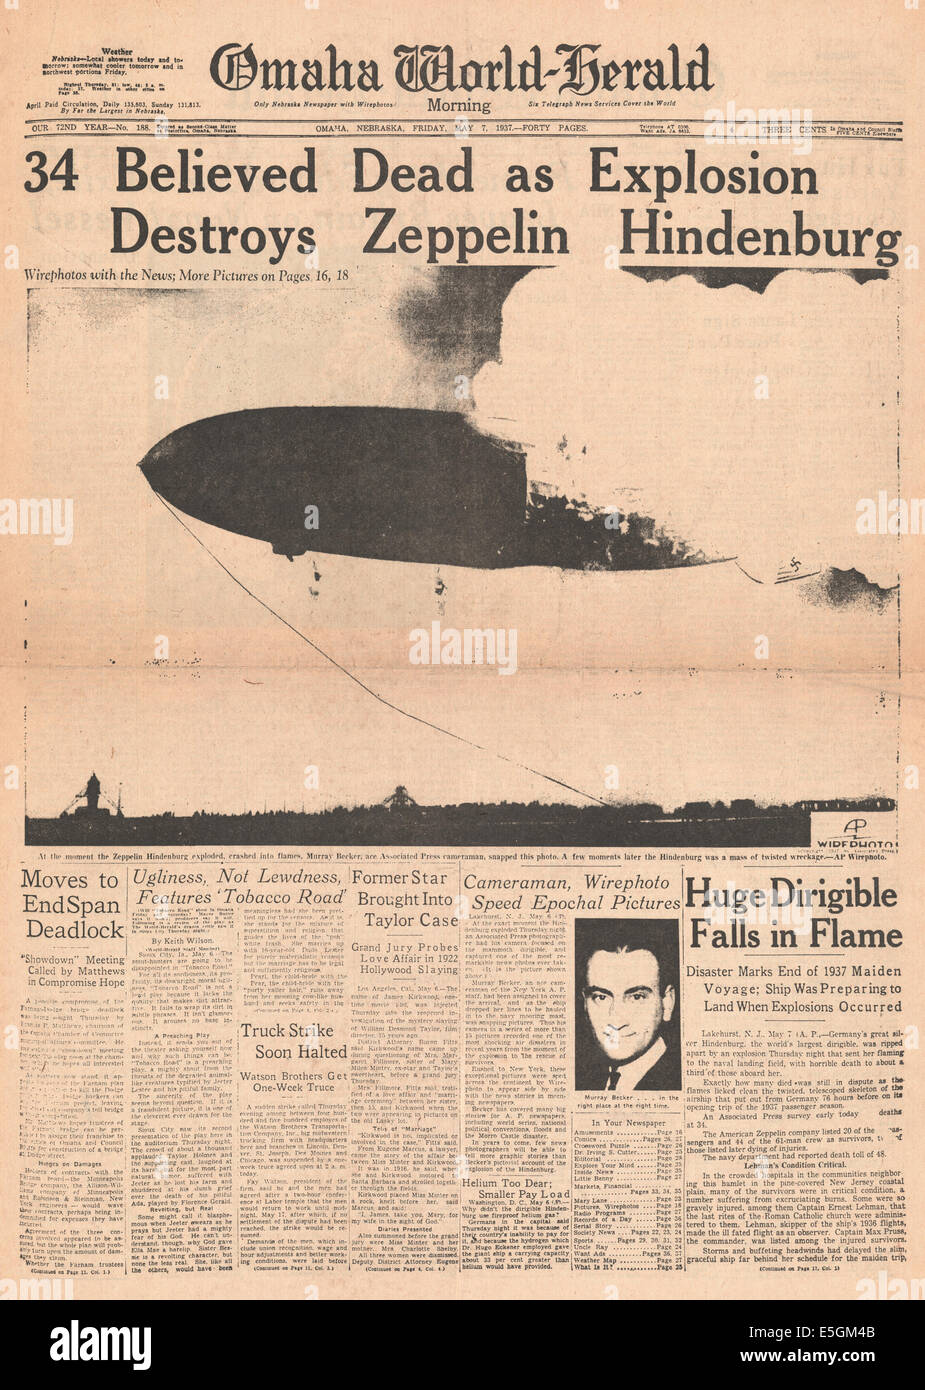 1937 Omaha World-Herald (USA) front page reporting the Hindenburg zeppelin disaster at Lakehurst, New Jersey Stock Photo